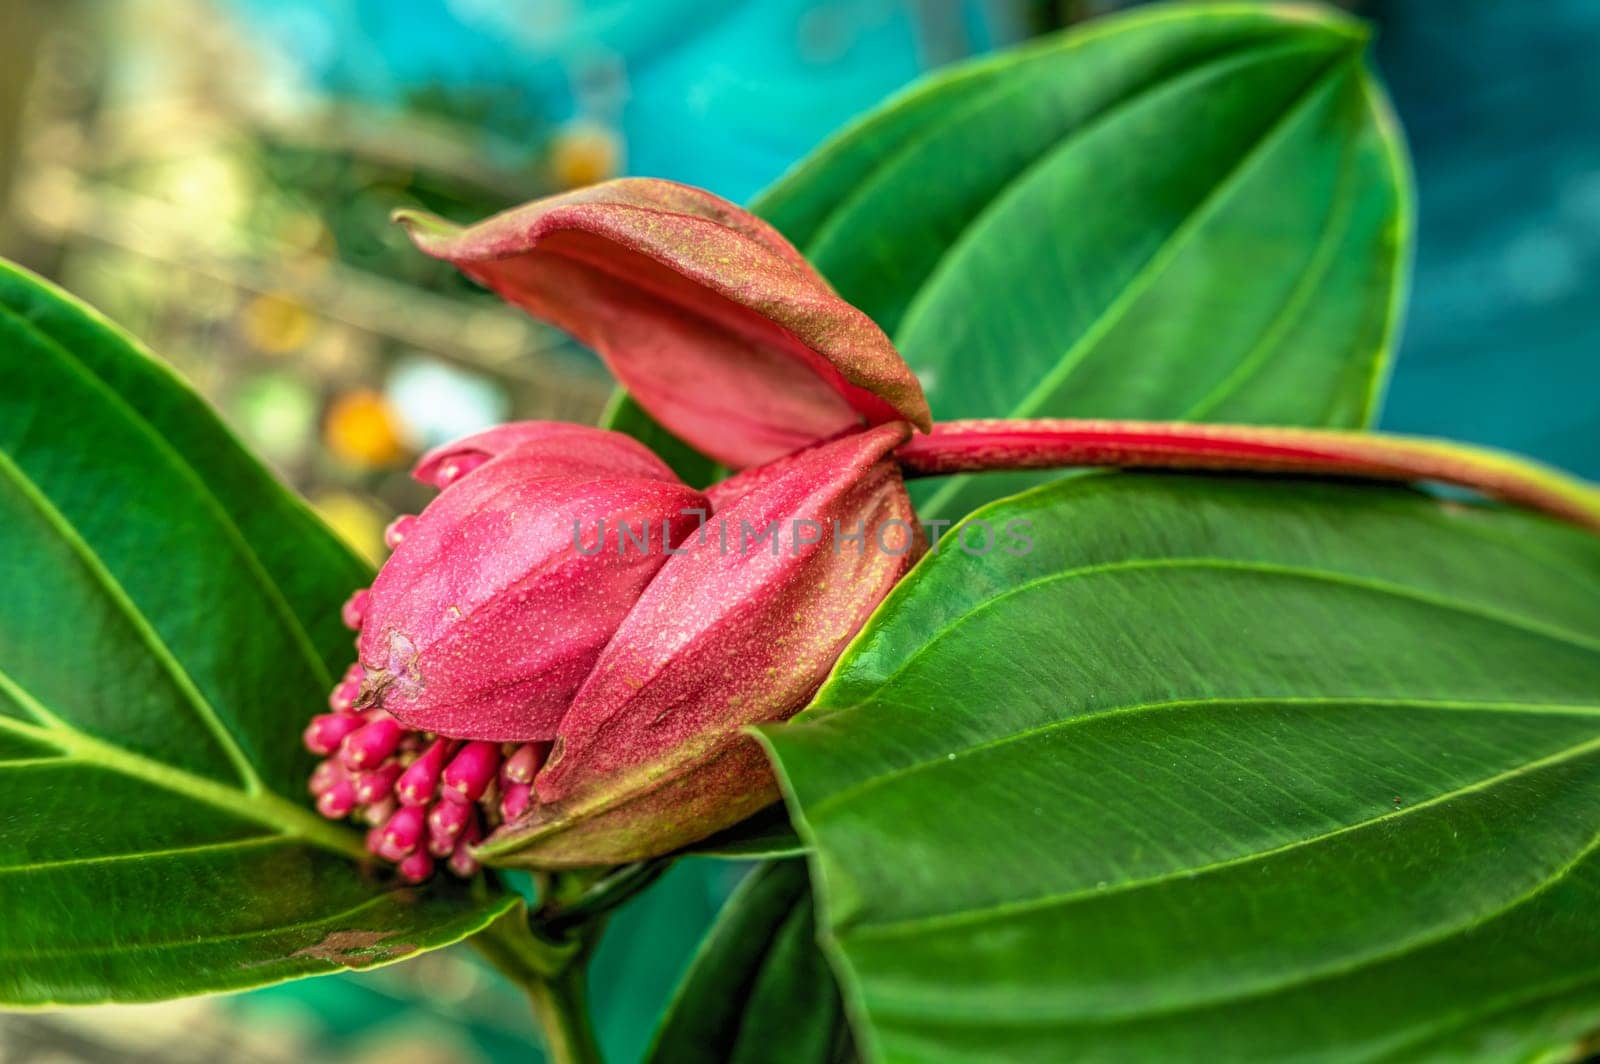 Red Medinilla flower in nature by Multipedia